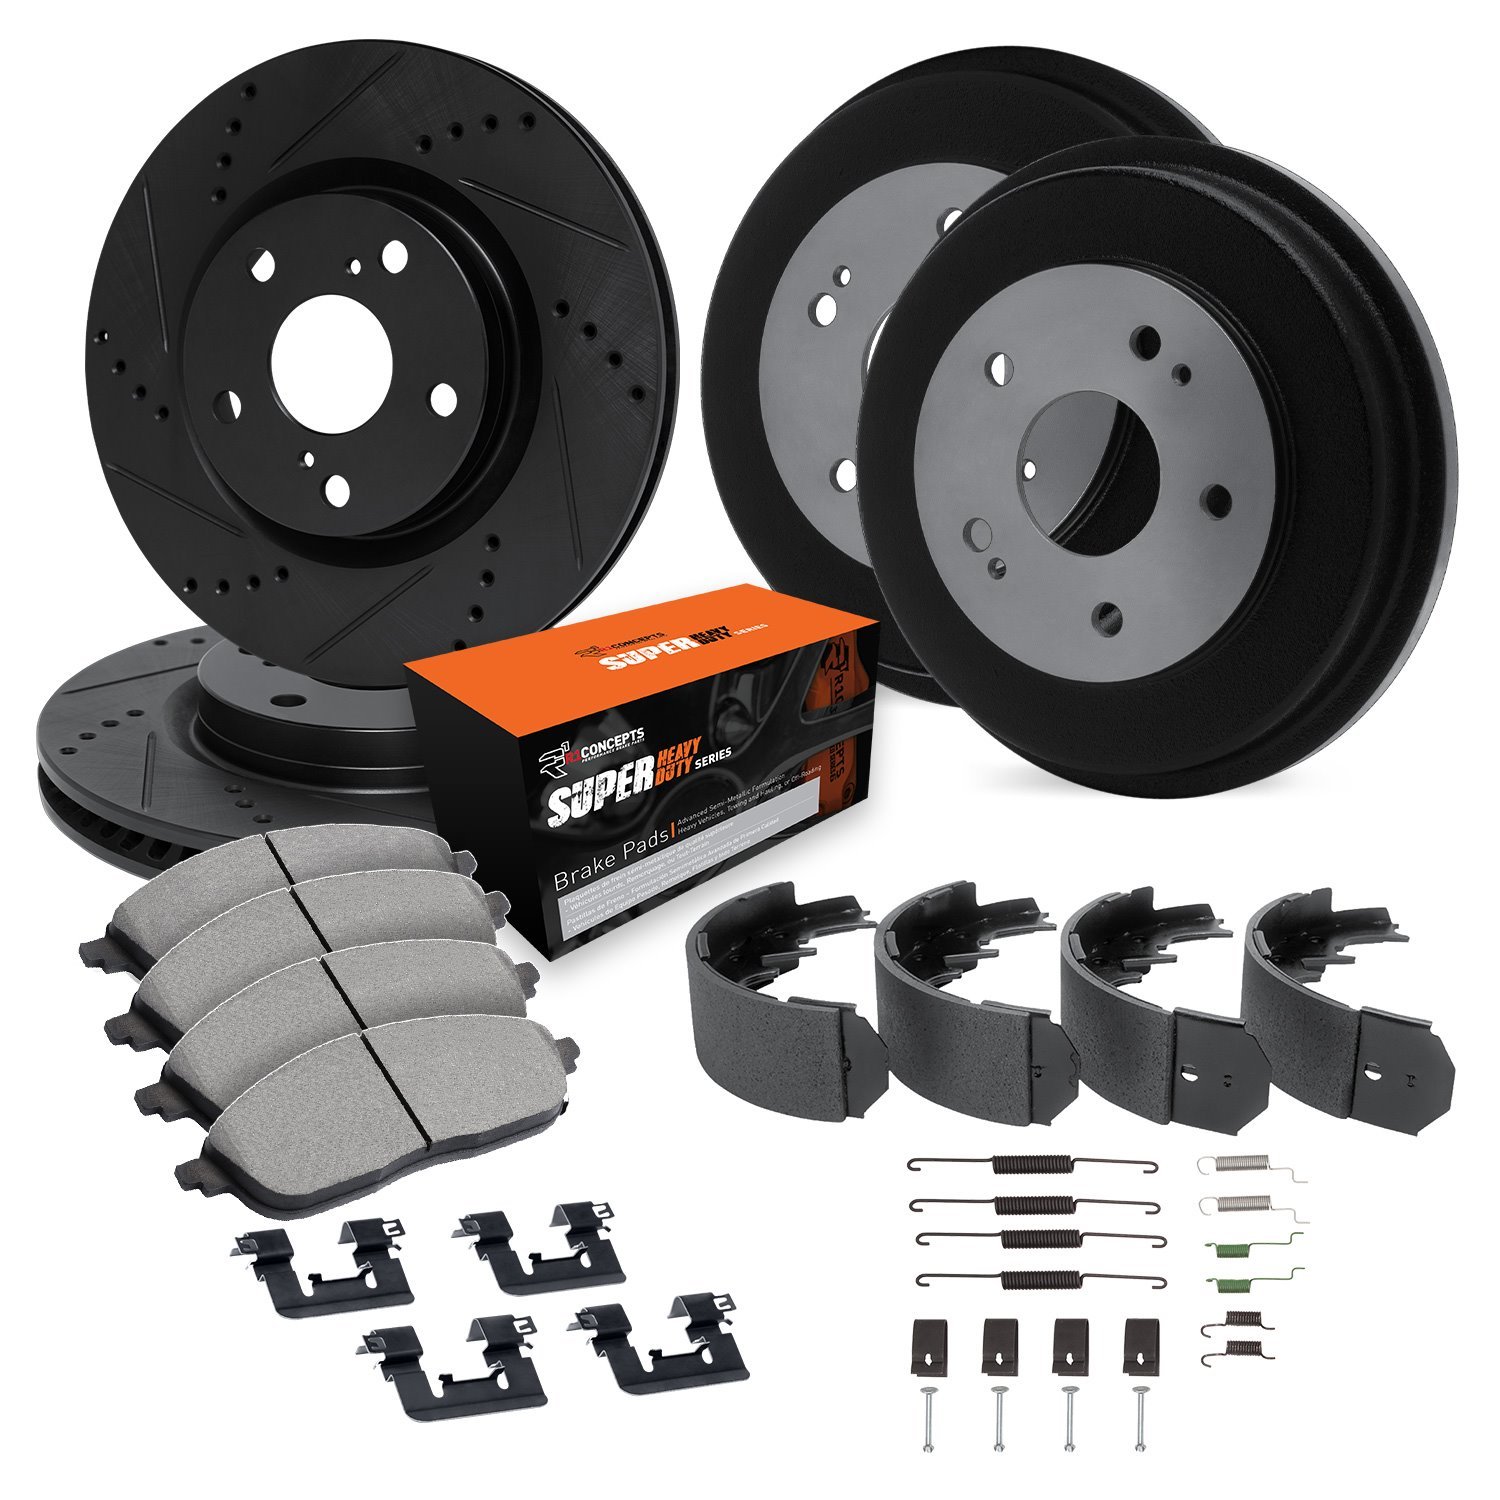 E-Line Drilled/Slotted Black Rotor & Drum Set w/Super-Duty Pads, Shoes, Hardware/Adjusters, 1993-1996 GM